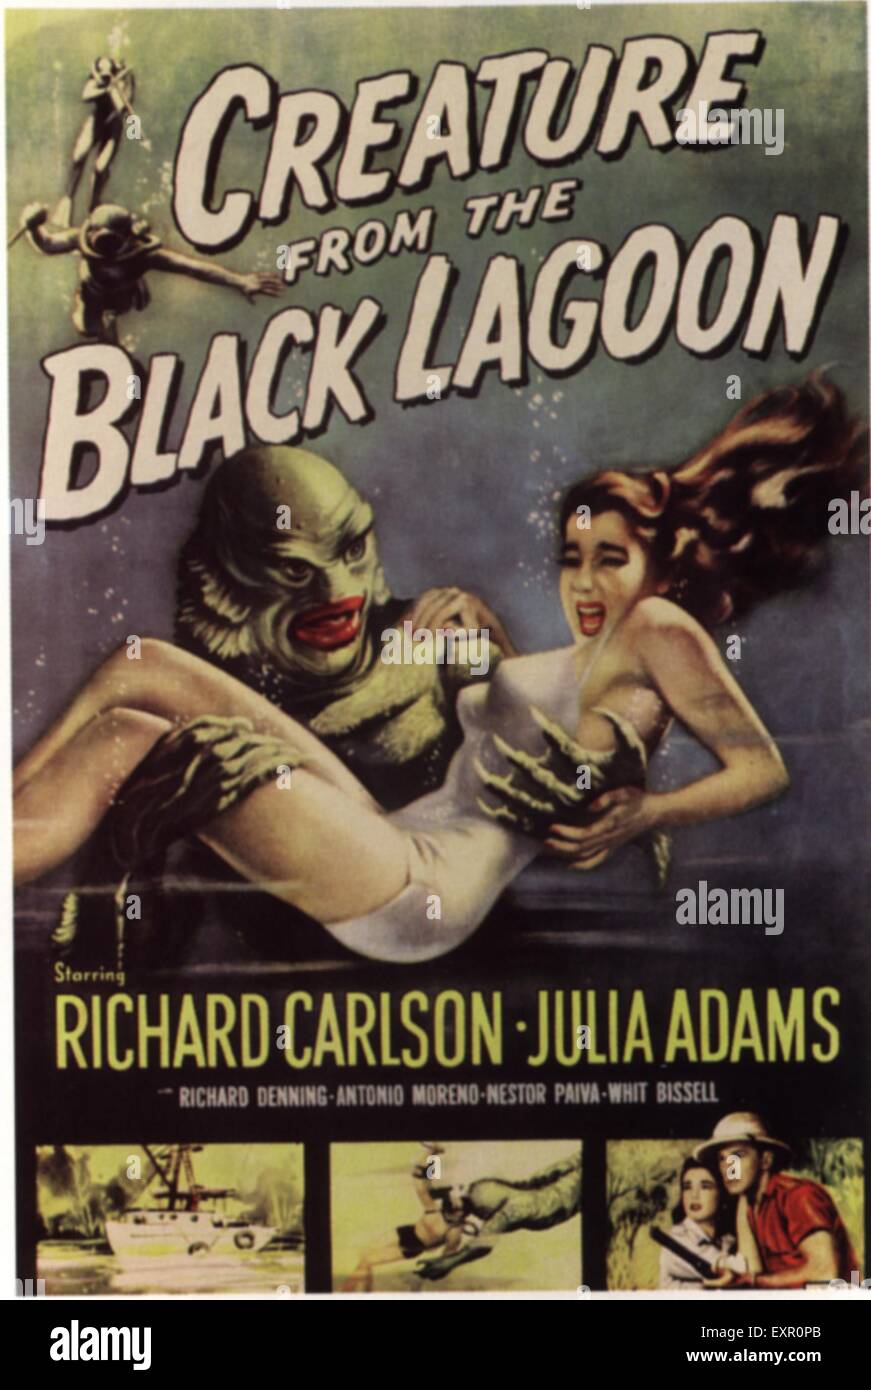 1950s USA Creature From The Black Lagoon Film Poster Stock Photo